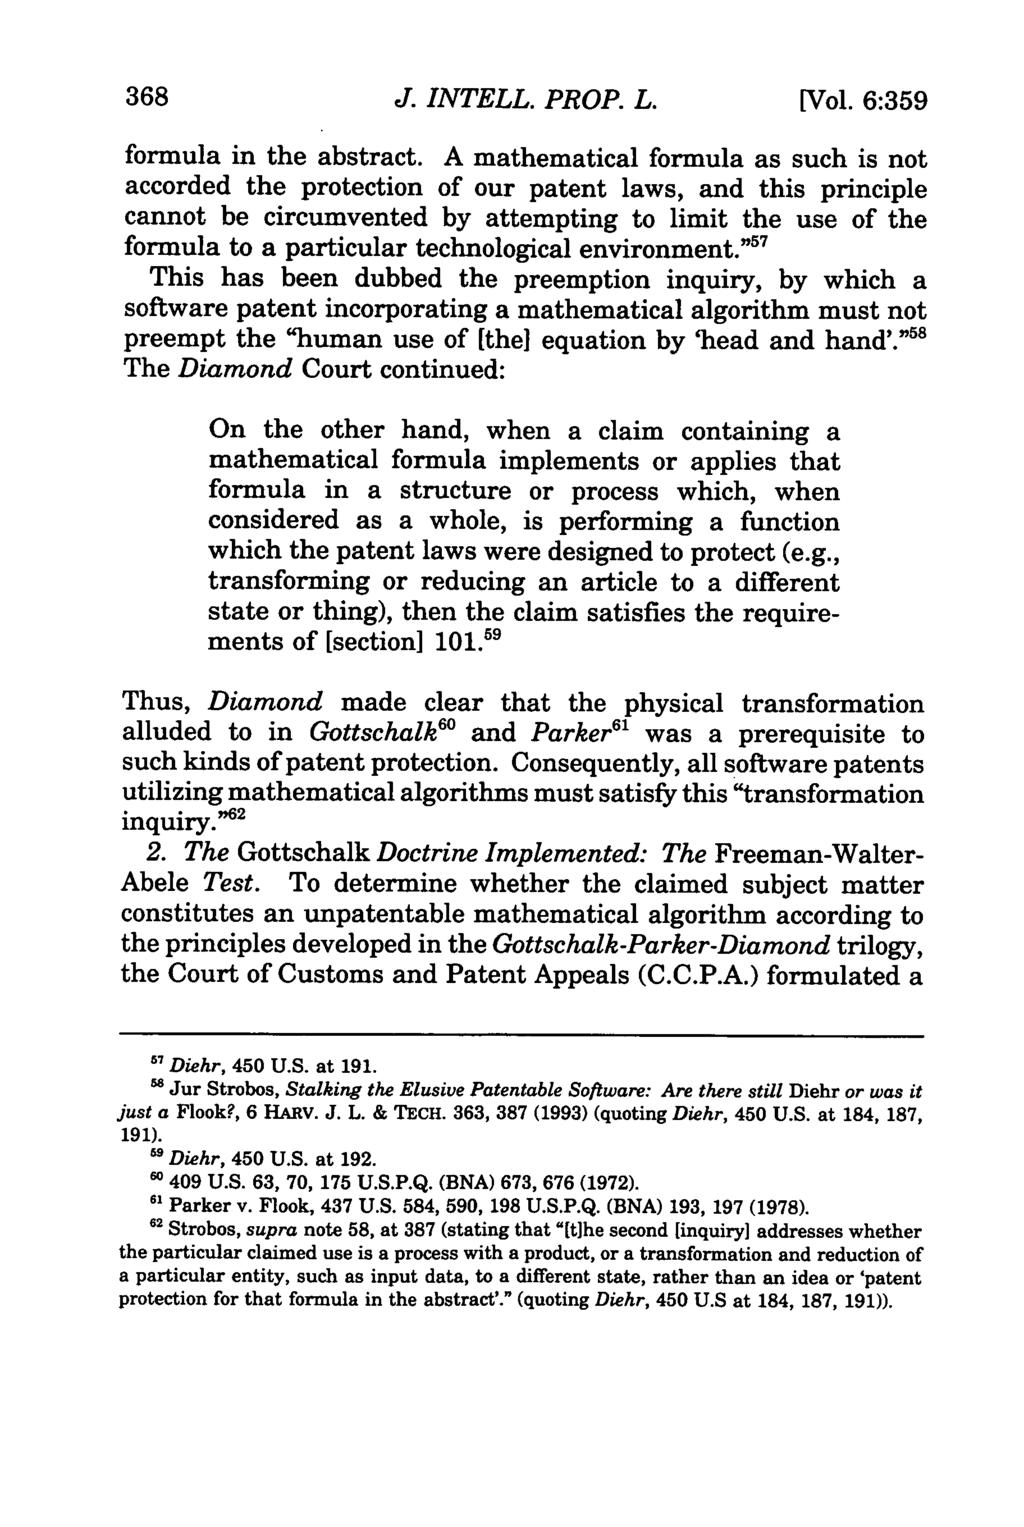 368 Journal of Intellectual Property Law, Vol. 6, Iss. 2 [1999], Art. 6 J. INTELL. PROP. L. [Vol. 6:359 formula in the abstract.